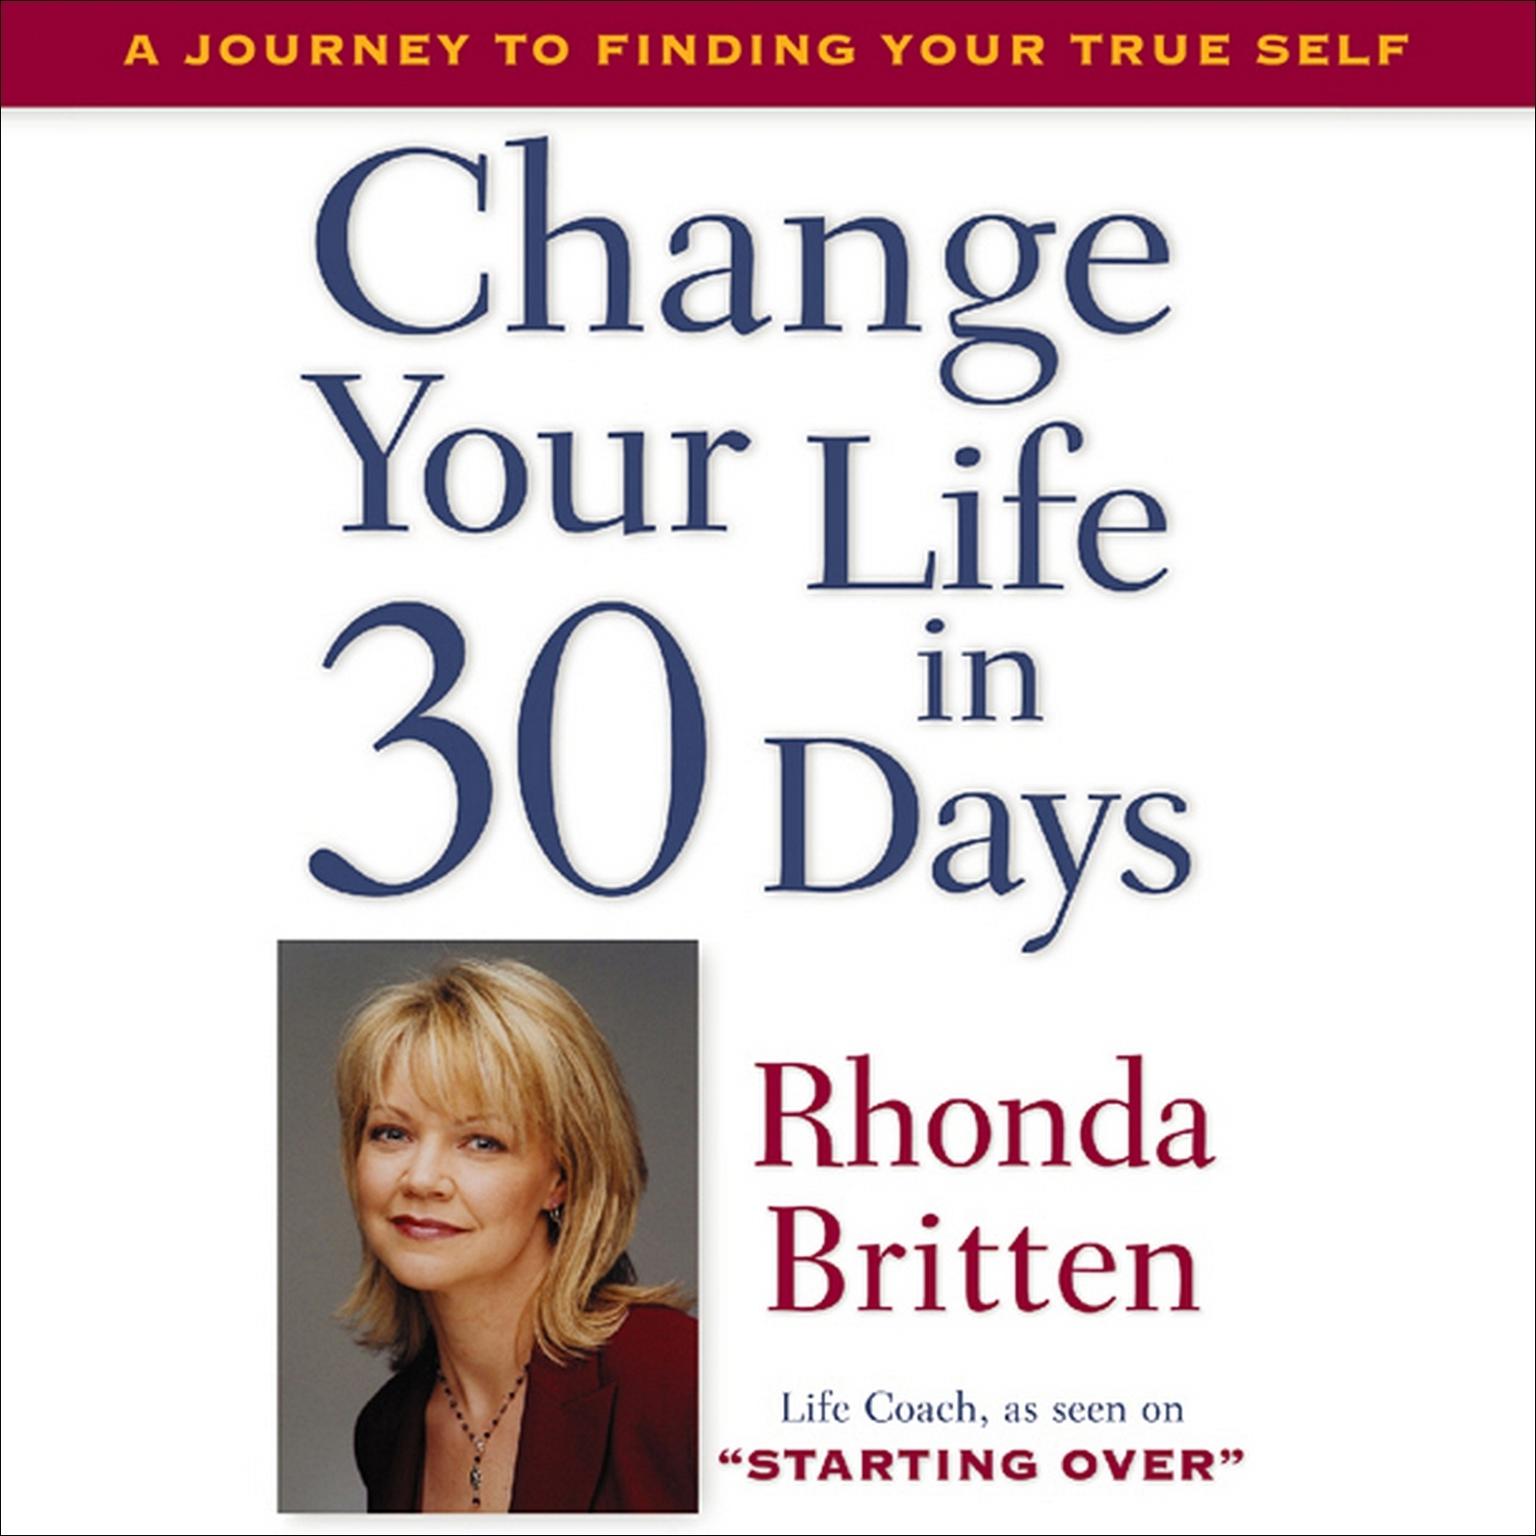 Change Your Life in 30 Days: A Journey to Finding Your True Self Audiobook, by Rhonda Britten